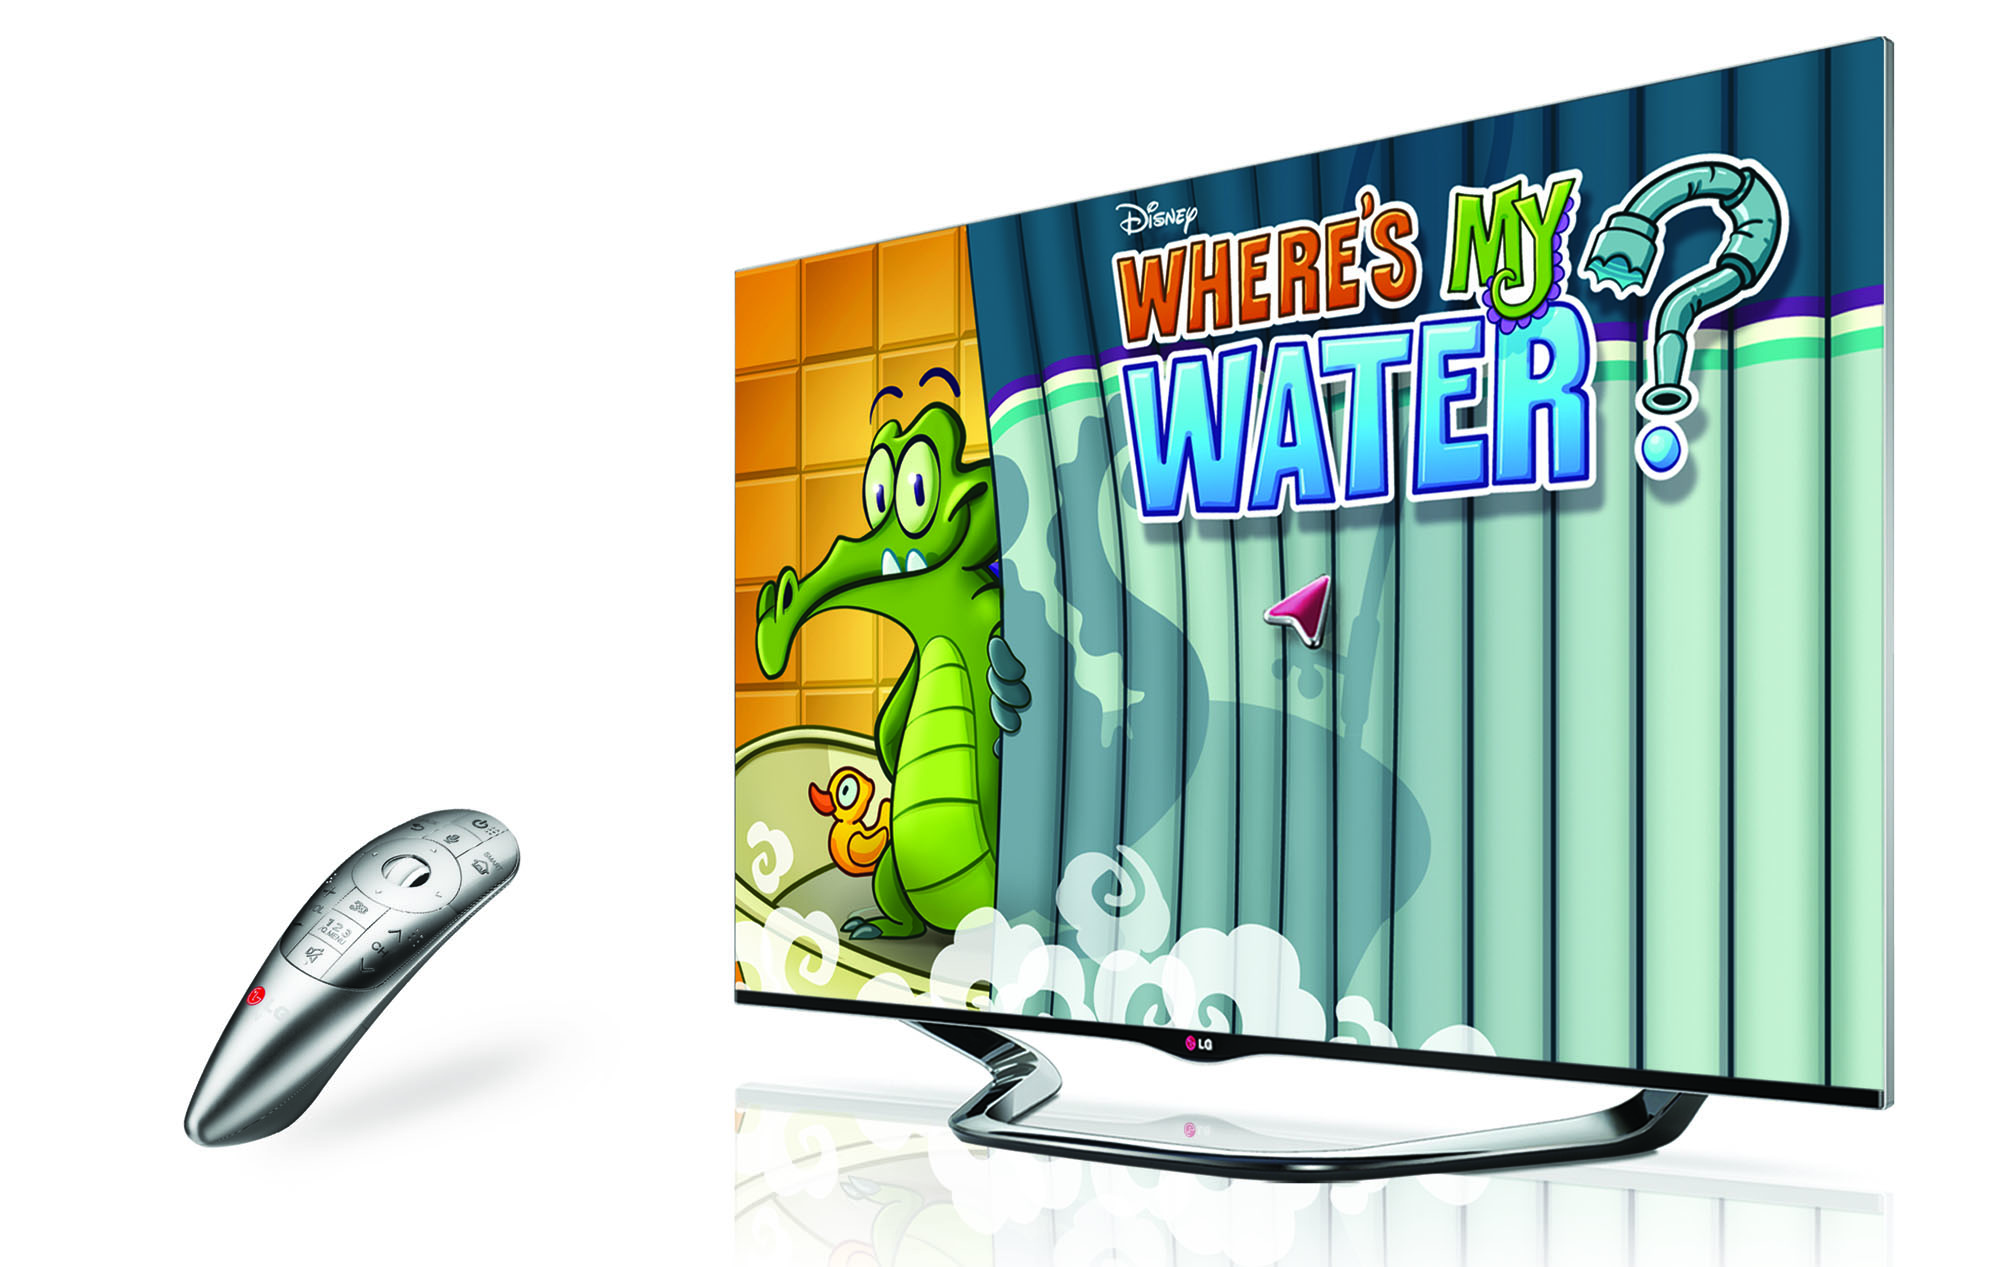 LG Magic Remote and the right-side view of an LG CINEMA 3D SMART TV displaying ‘Where’s My Water’, a game that can be found on the Smart TV’s game store